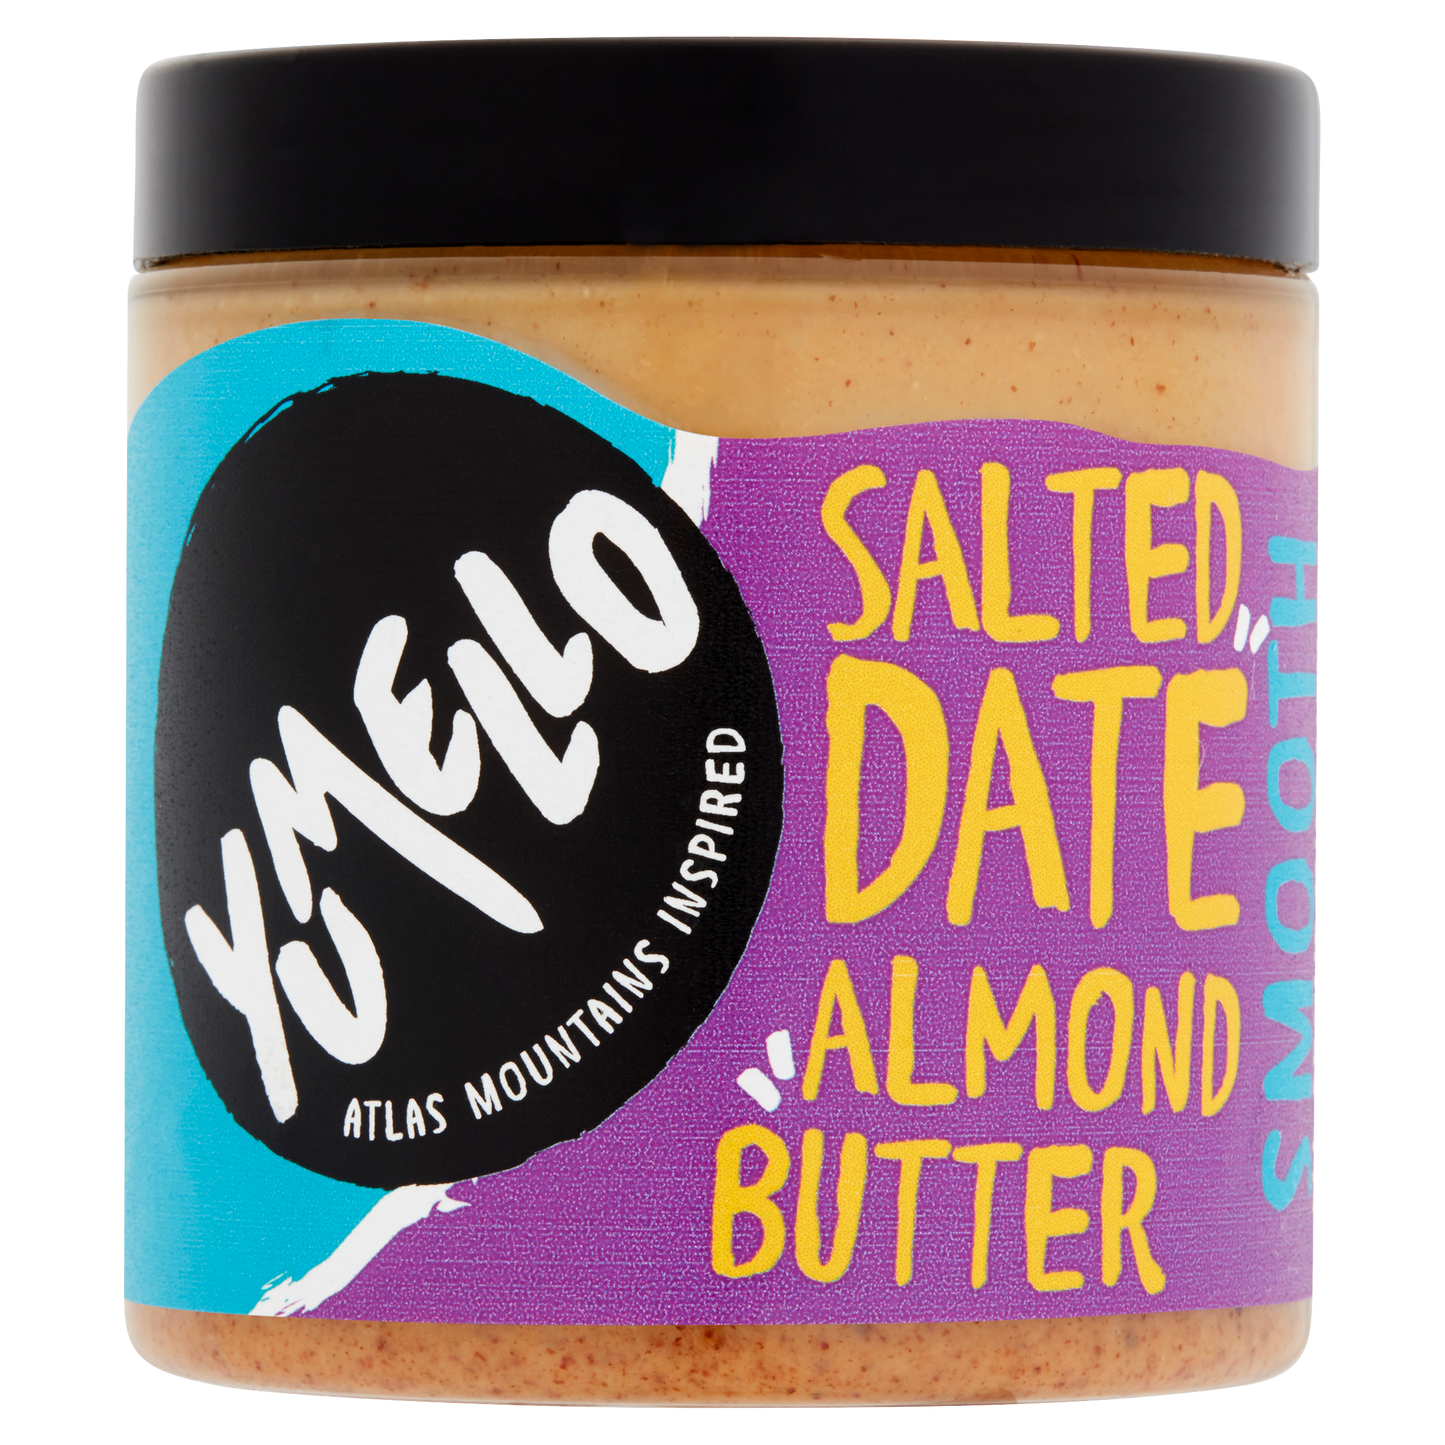 Yumello Nut Butters